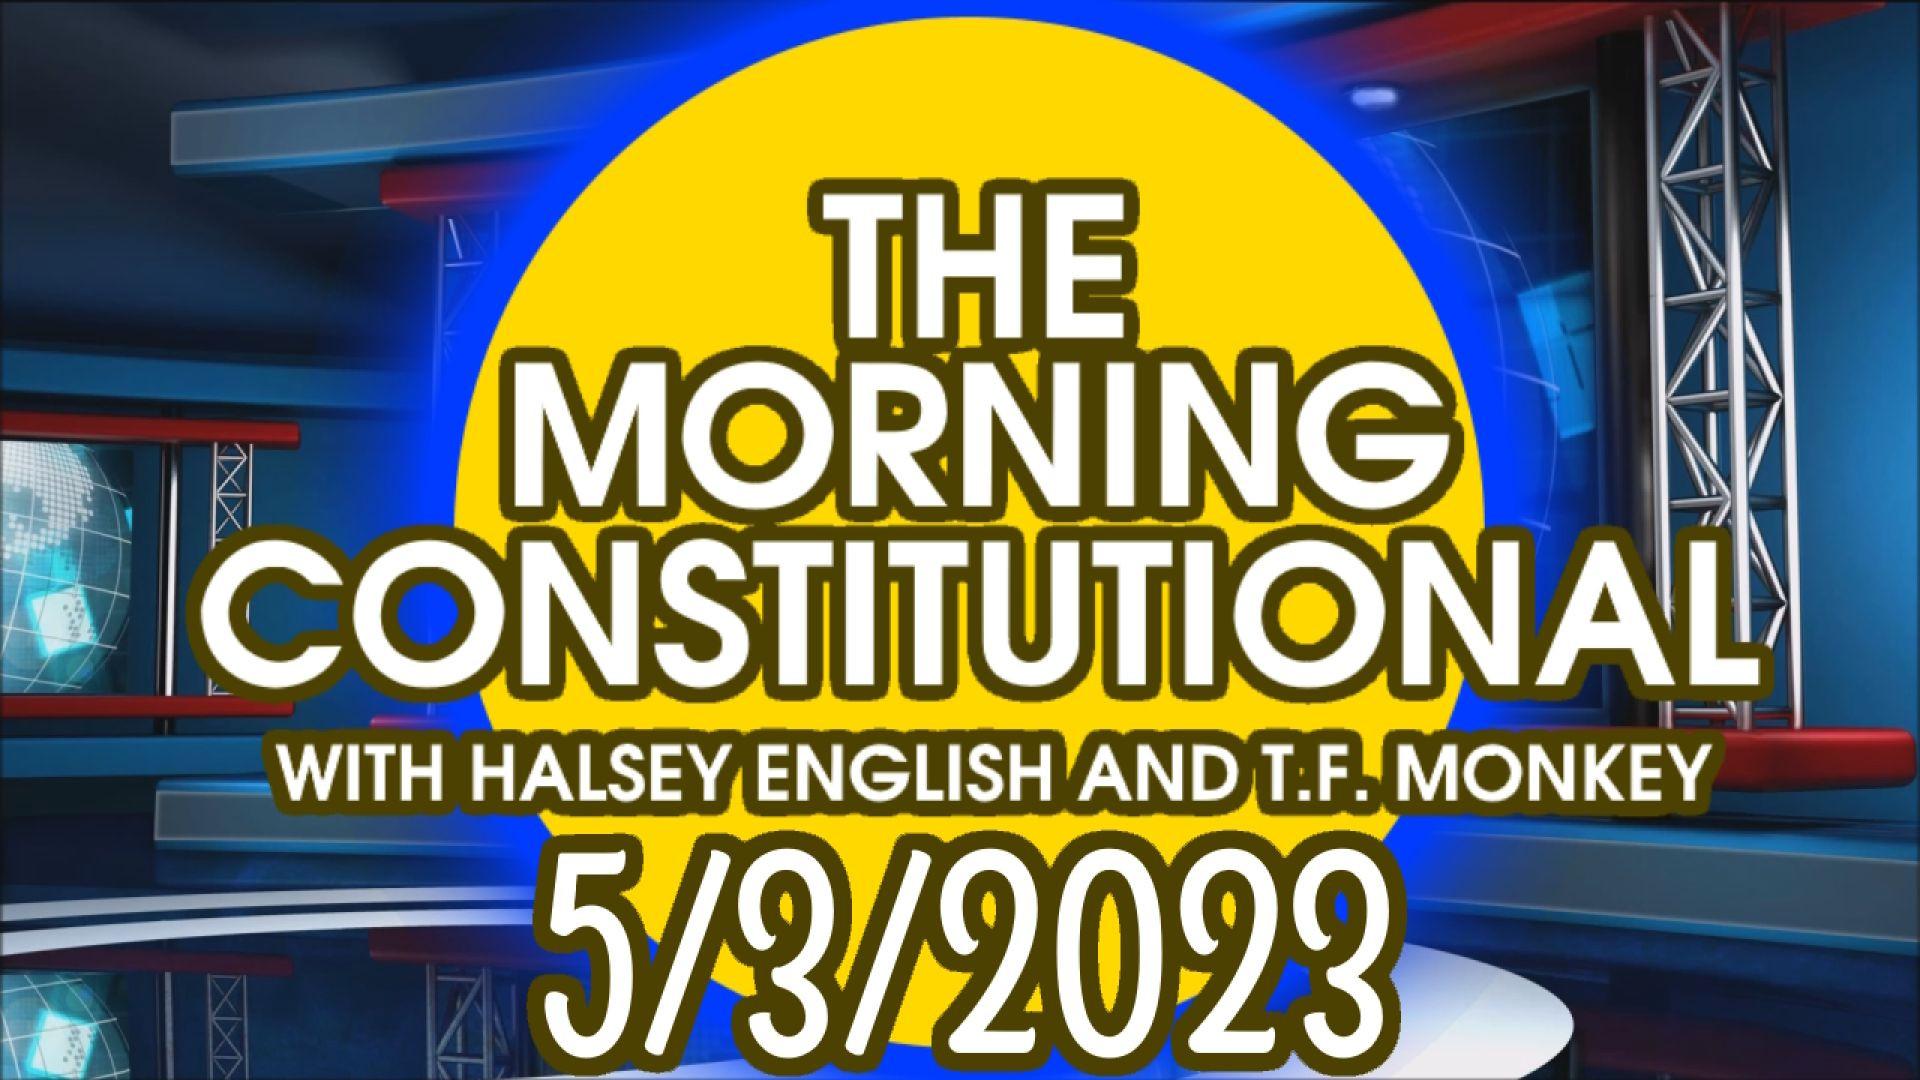 The Morning Constitutional: 5/3/2023